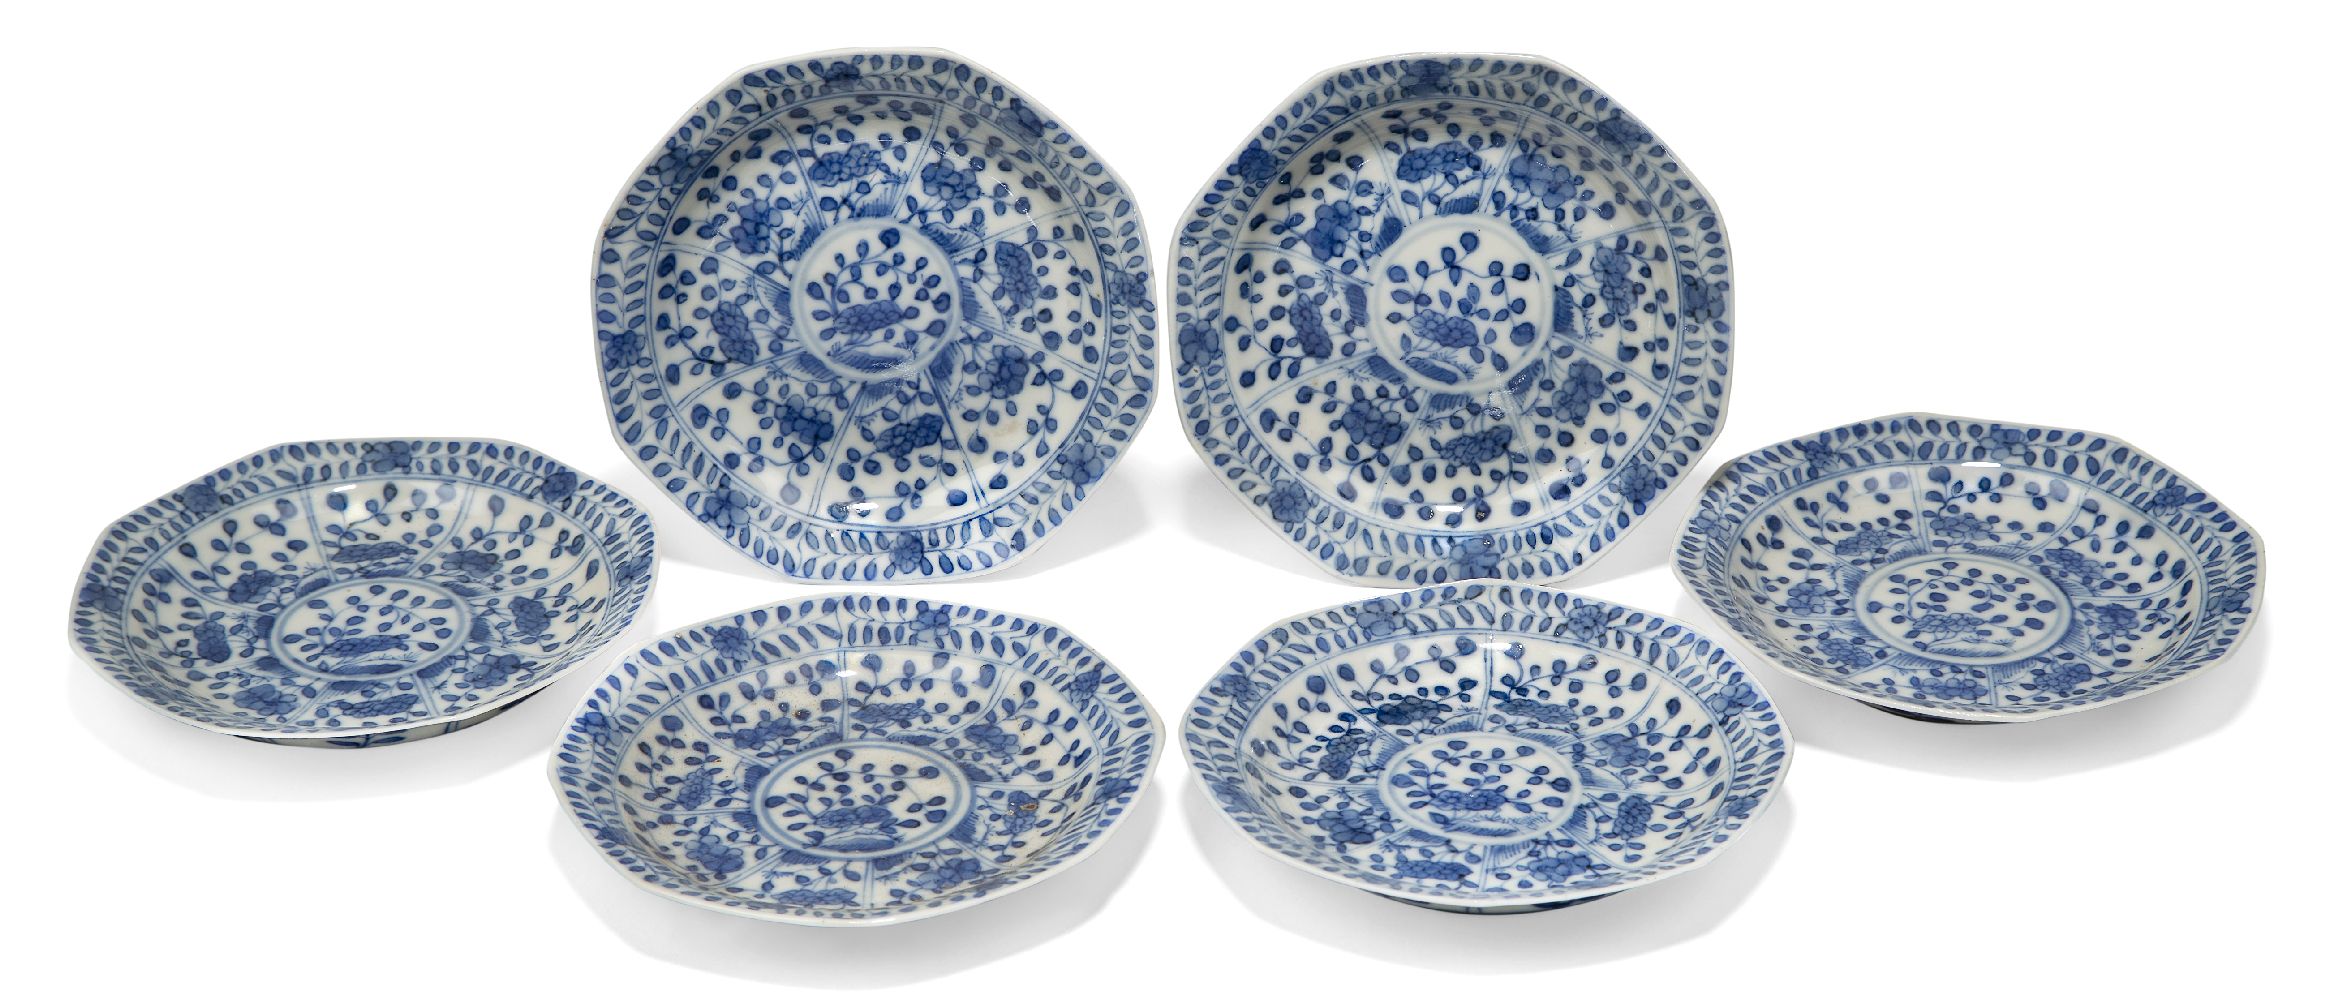 A set of six Chinese porcelain blue and white saucer dishes, 18th century, decorated with panels